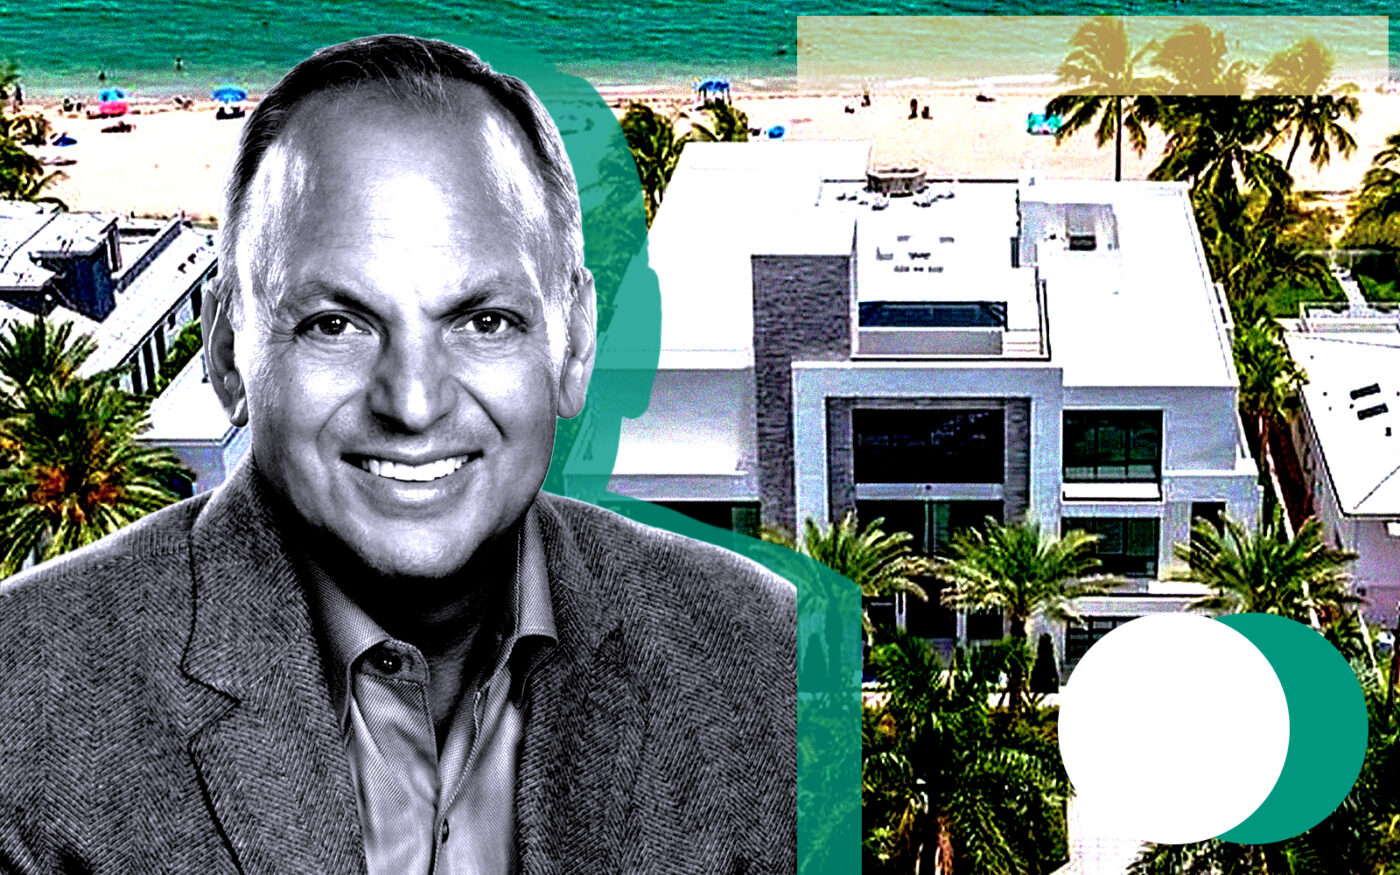 WeatherTech Founder Sells Fort Lauderdale Mansion for $40M